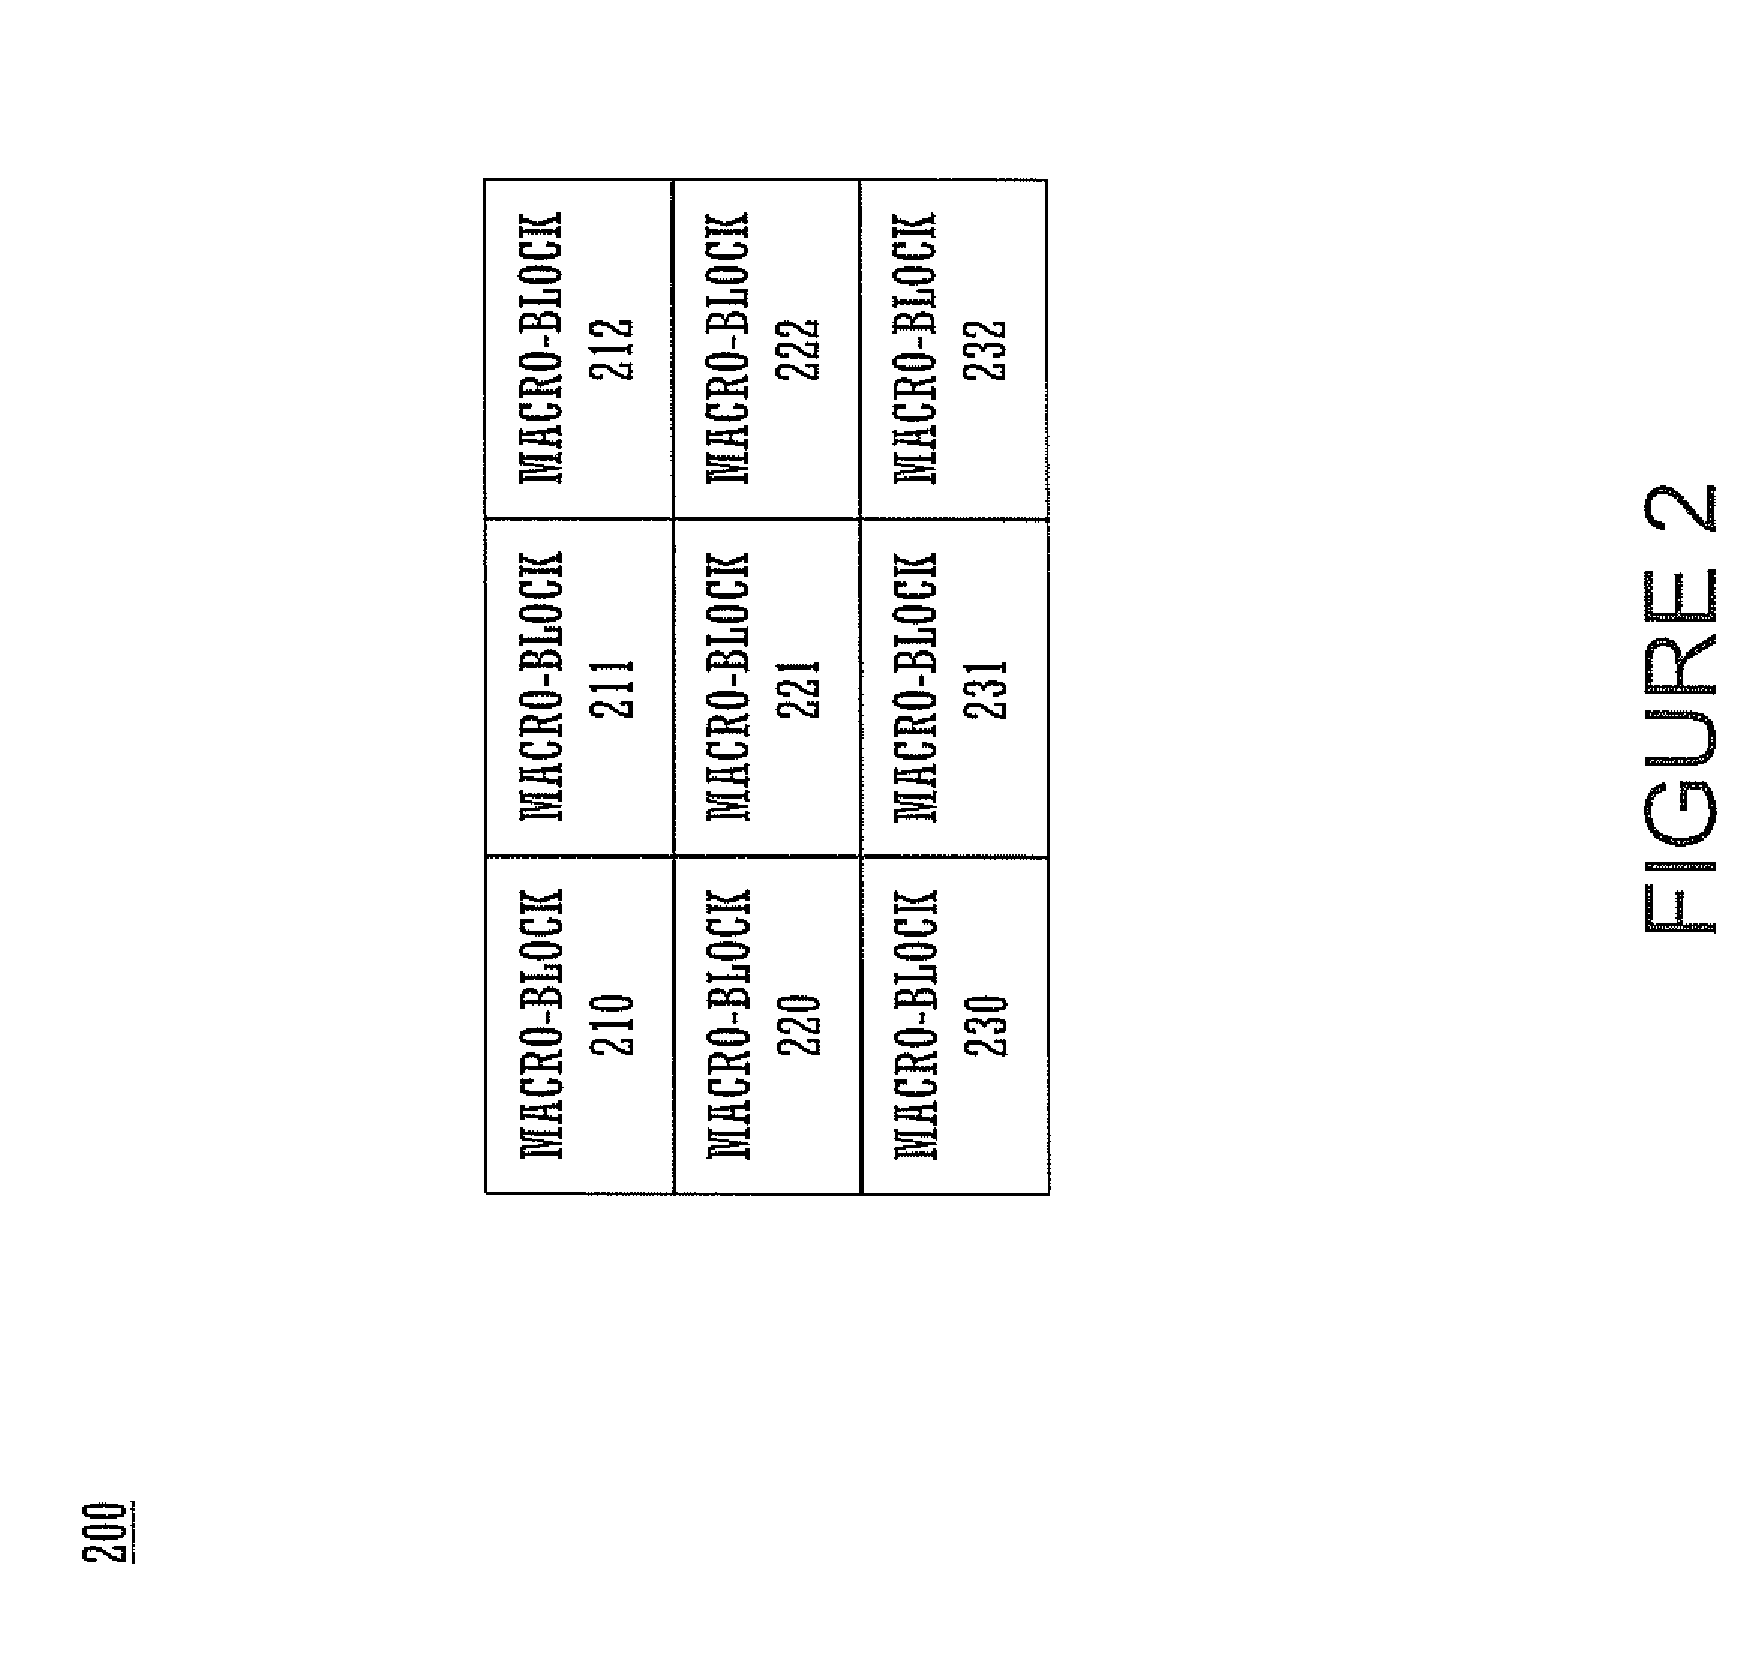 System and method for intra refresh implementation with pseudo random number generation